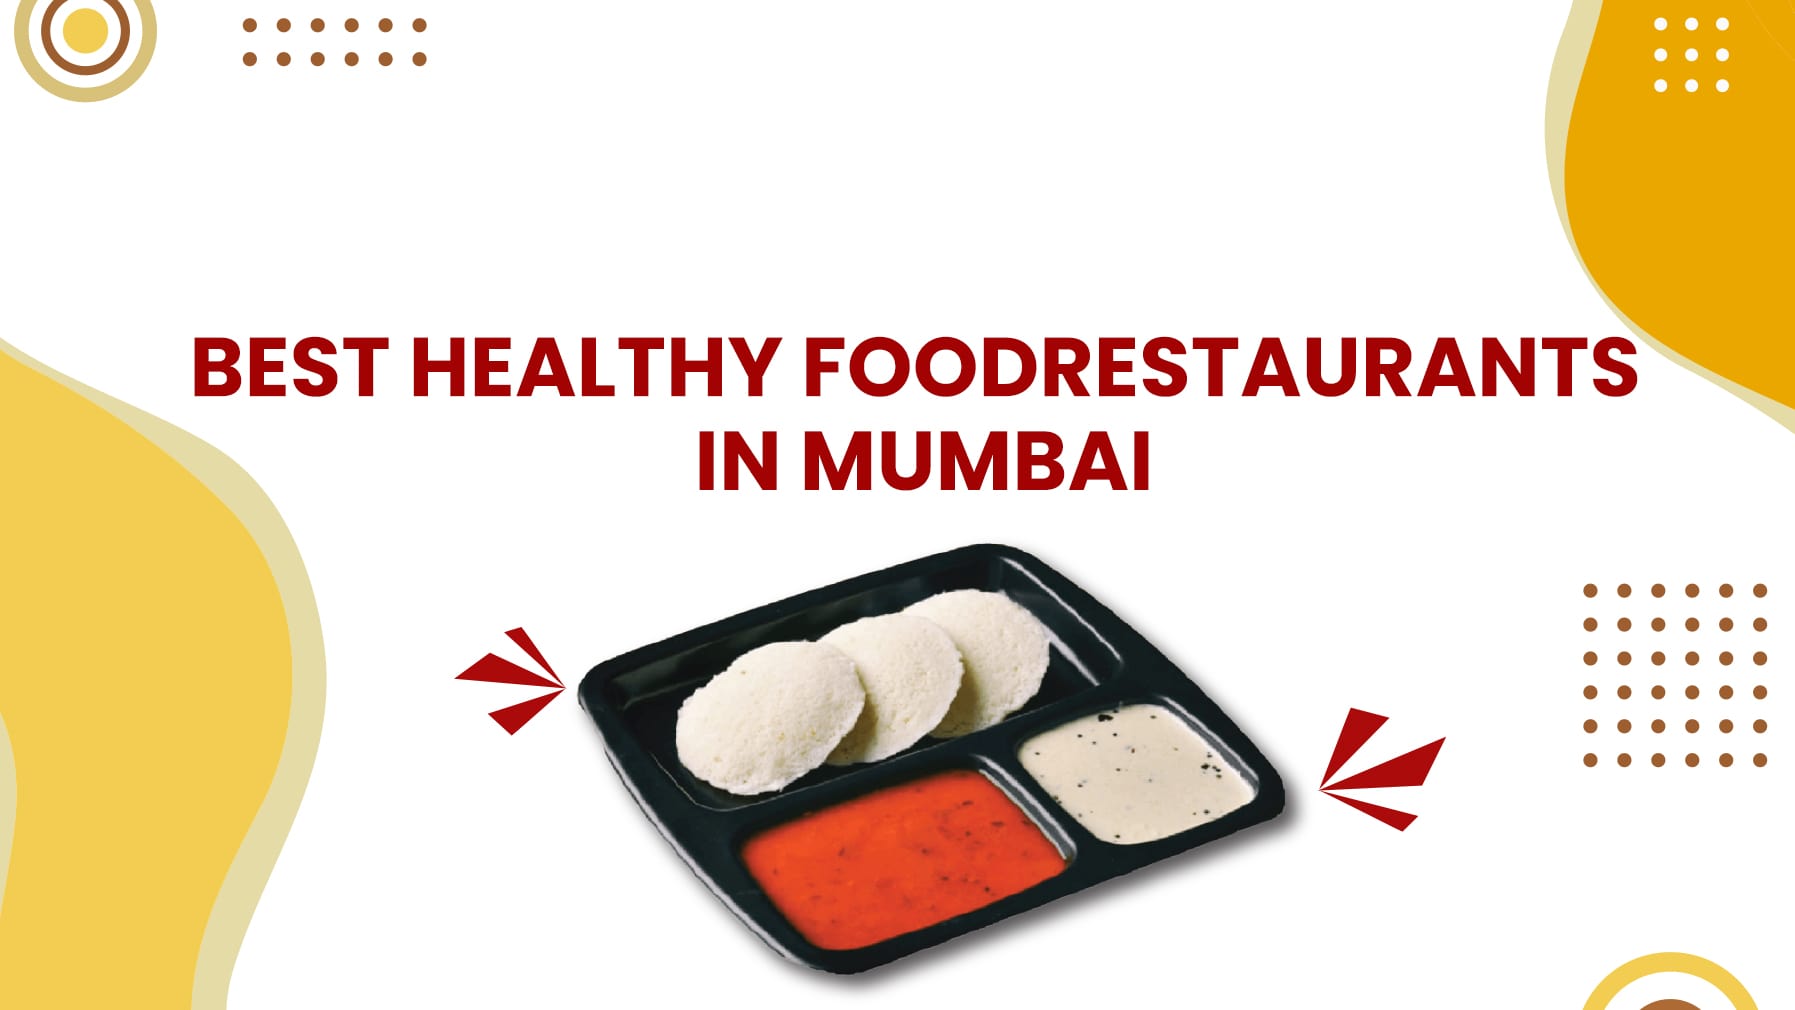 The best healthy food restaurants in Mumbai you would love to visit